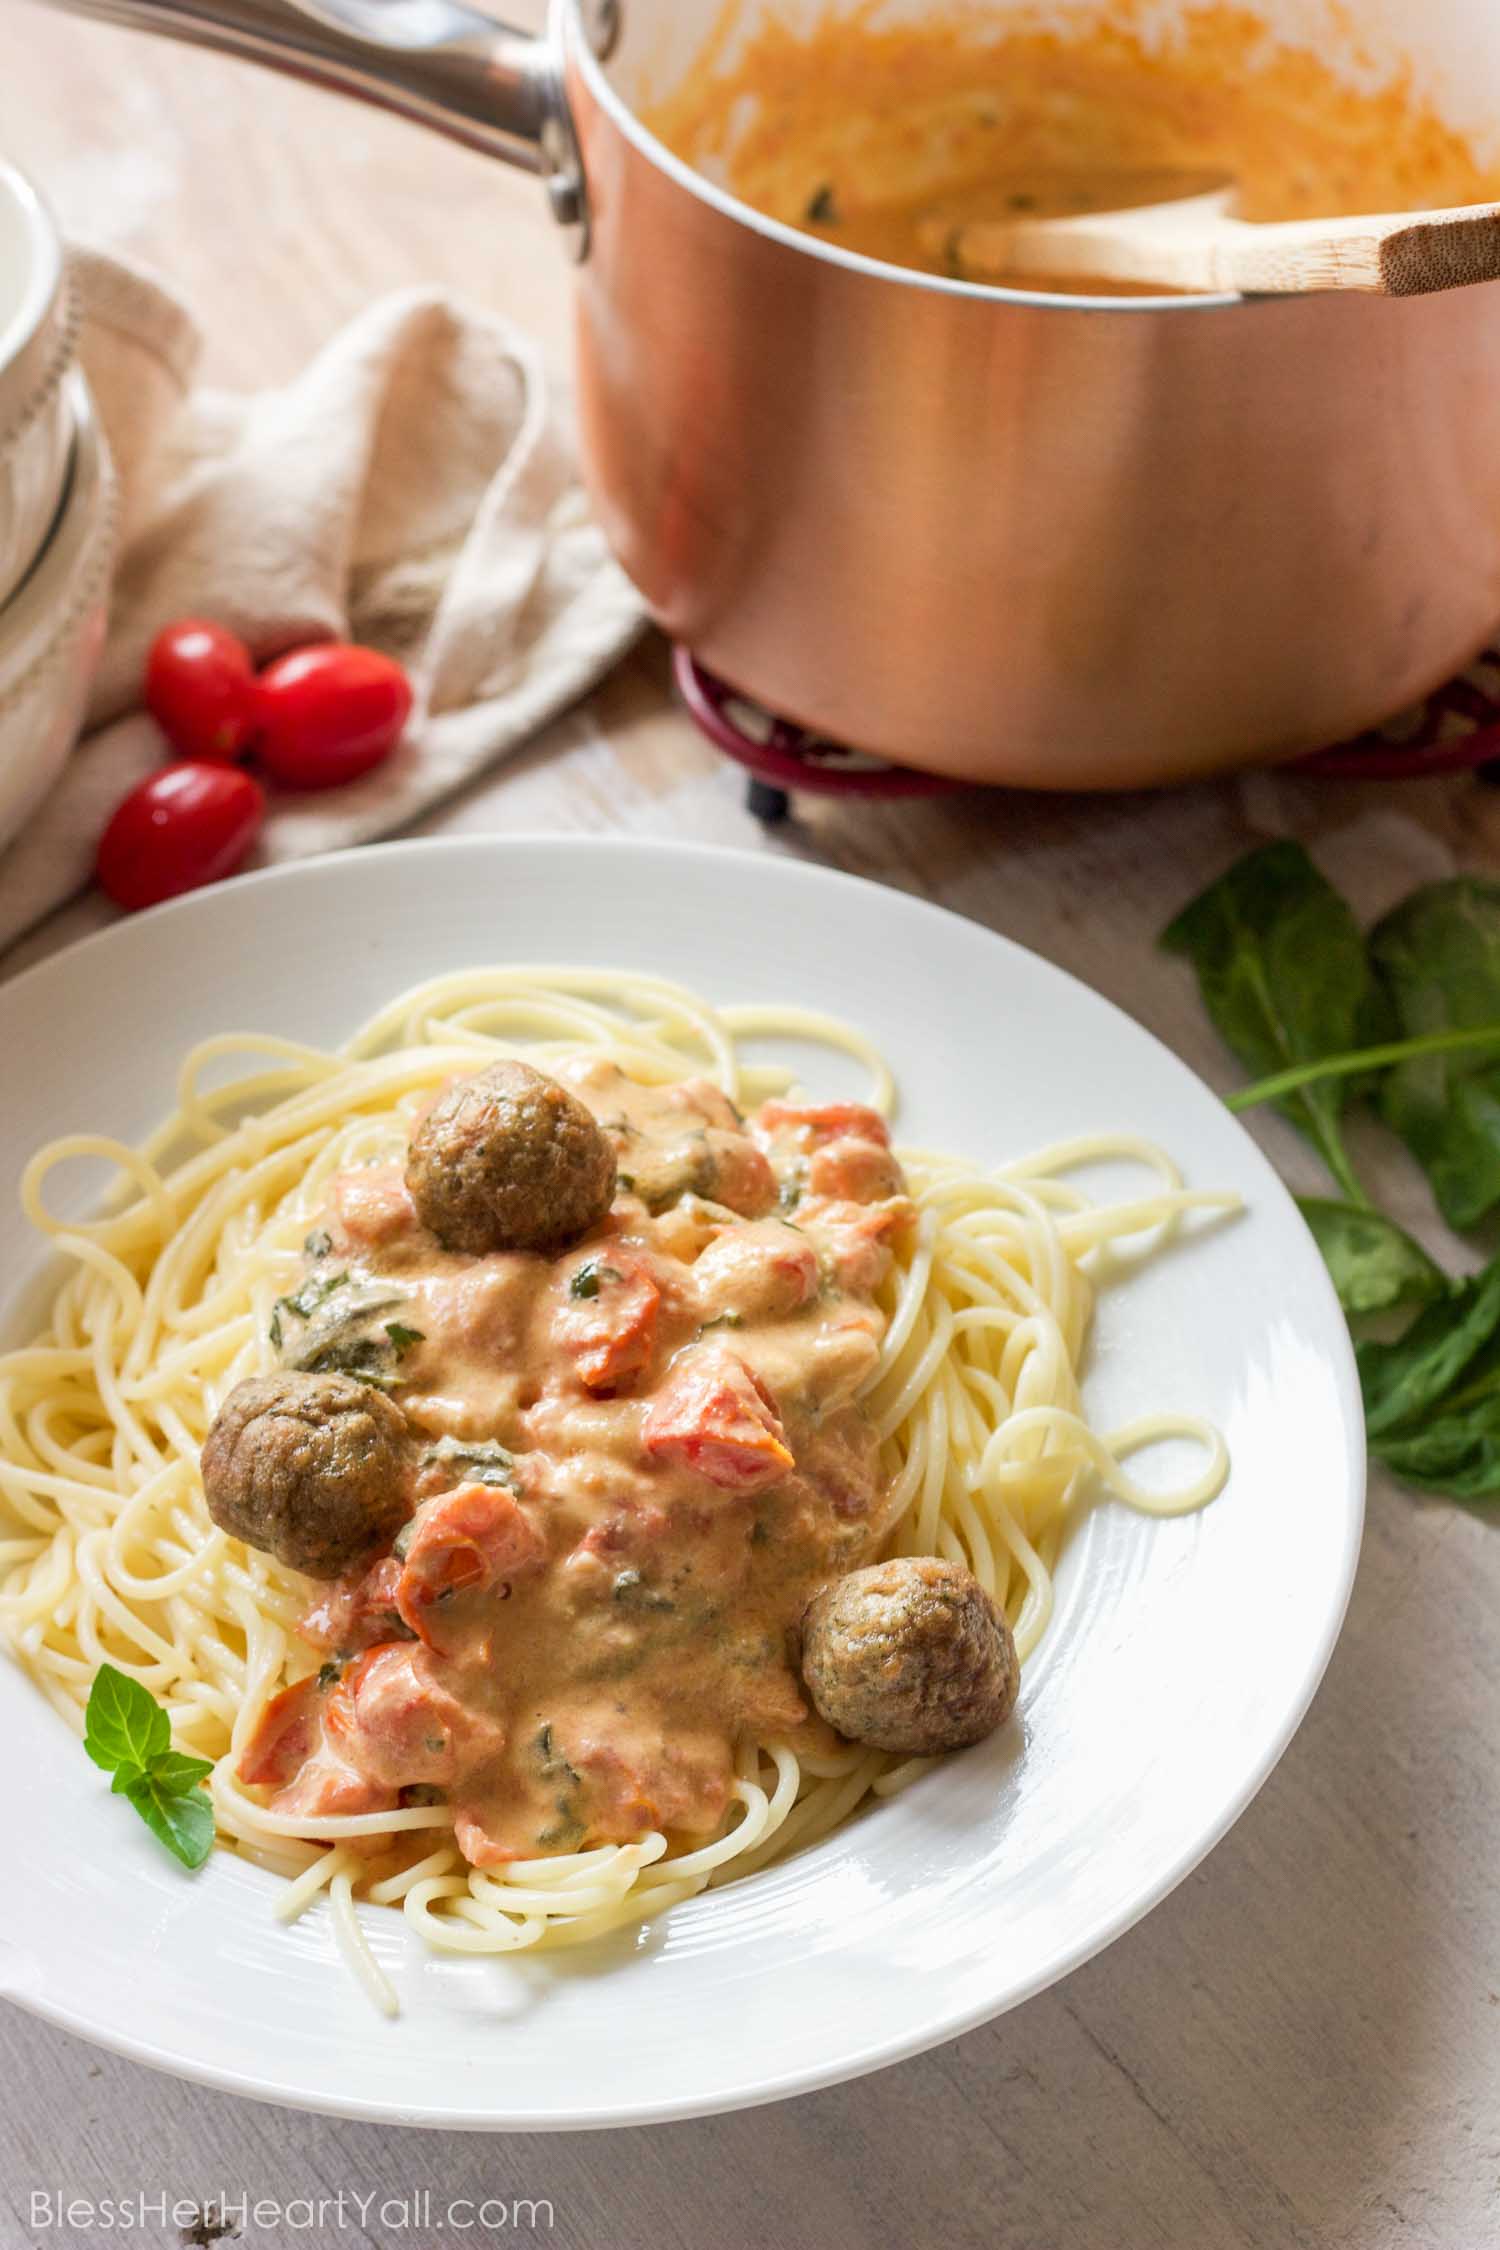 This easy goat cheese spaghetti and meatballs recipe combines fresh goat cheese, smashed tomatoes, and fresh basil, garlic, and onion for a delicious meal in less than 20 minutes!